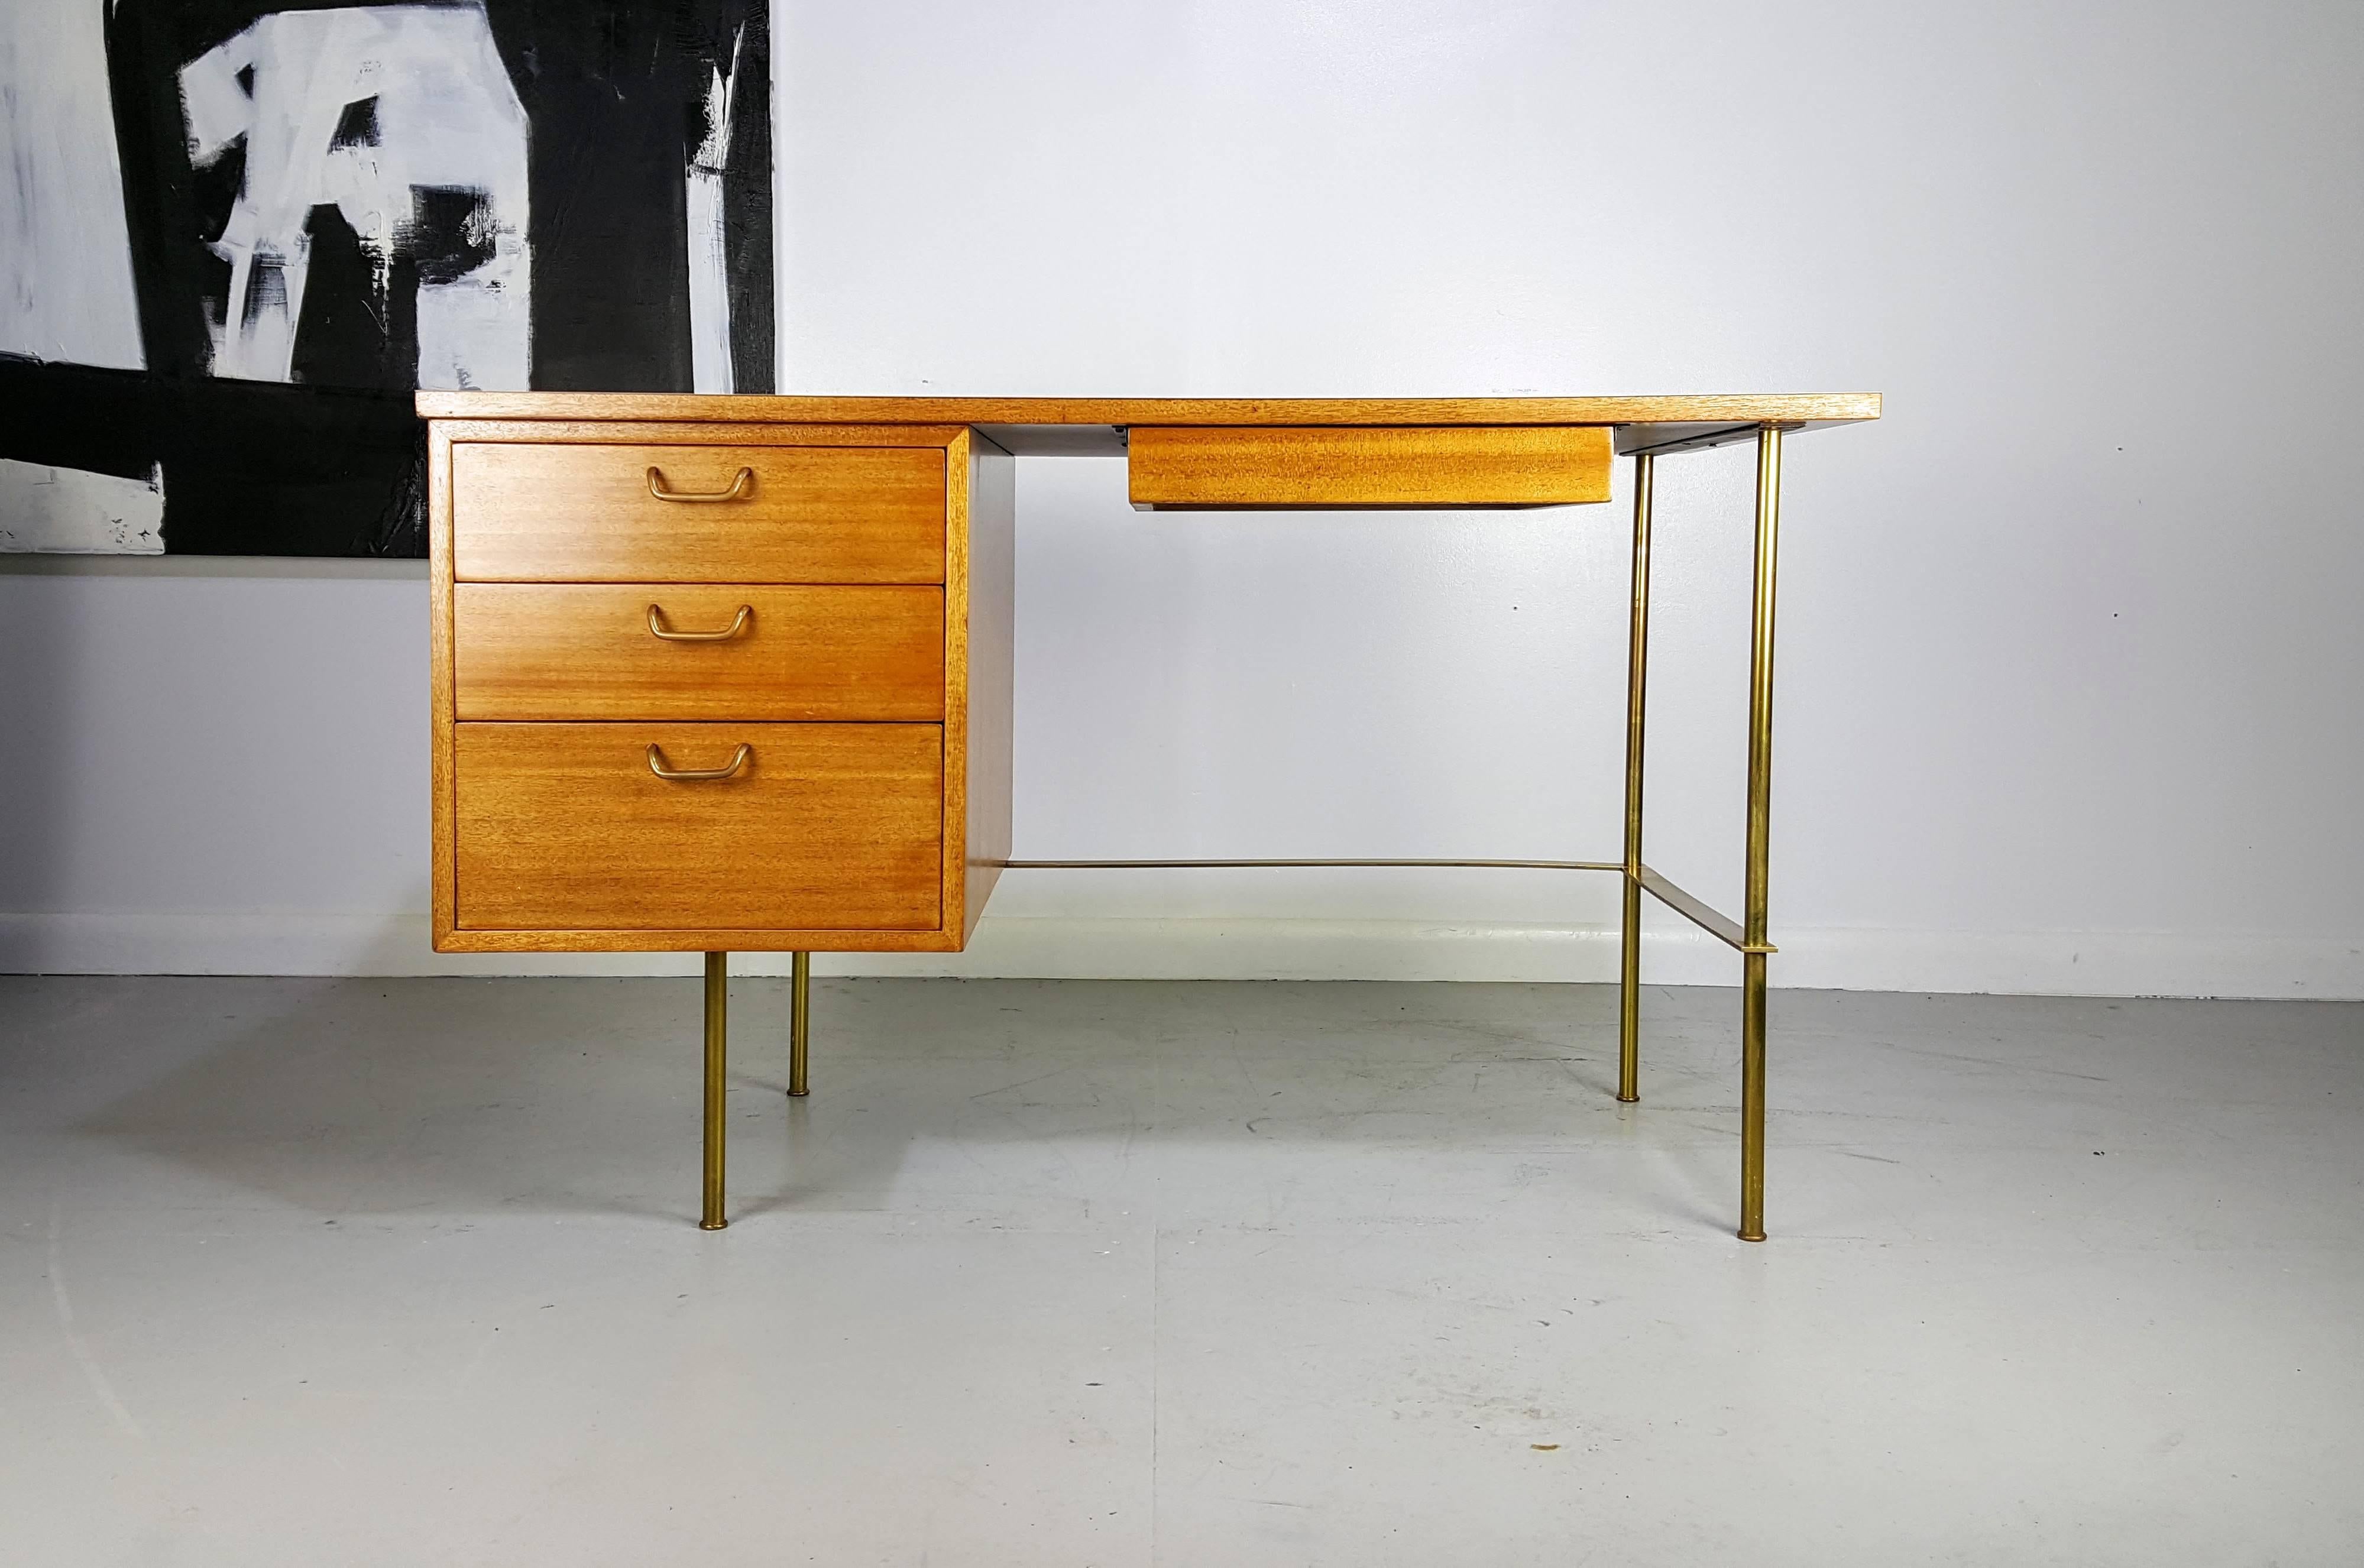 Rare brass and mahogany writing desk by Harvey Probber, 1960s.

See this item in our private NYC showroom! Refine Limited is located in the heart of Chelsea at the history Starrett-LeHigh Building, 601 West 26th Street, Suite M258. Please call us